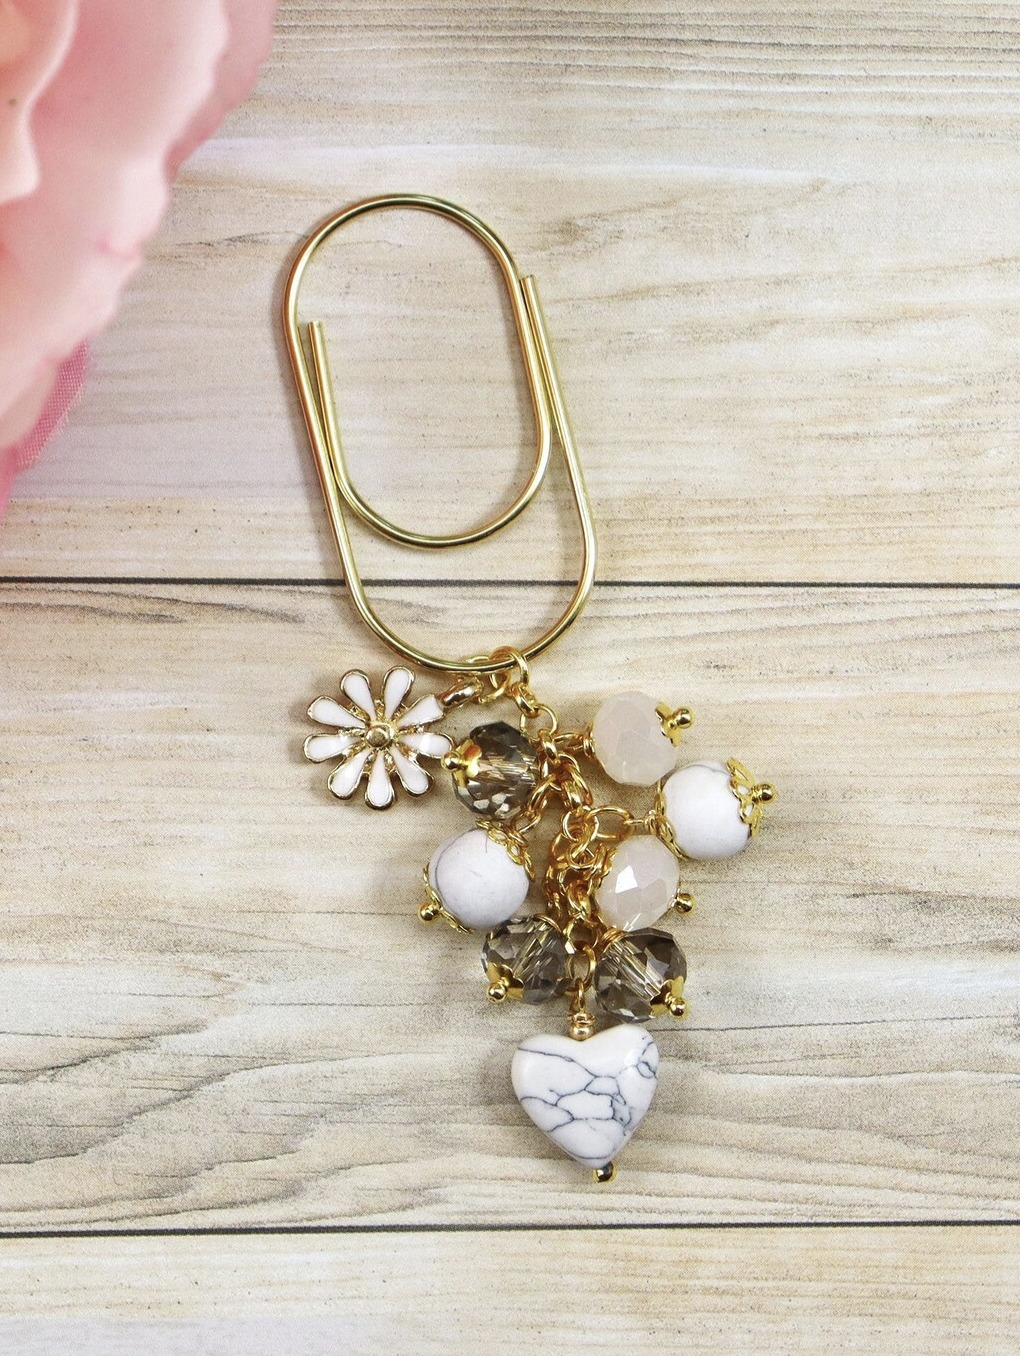 This image shows a gold toned oversized paperclip with a golden chain strong with white air descent beads, a heart shaped marble bead, and a daisy charm. This planner charm is sitting on top of a light colored wood background with sunflower petals showing in the corner.